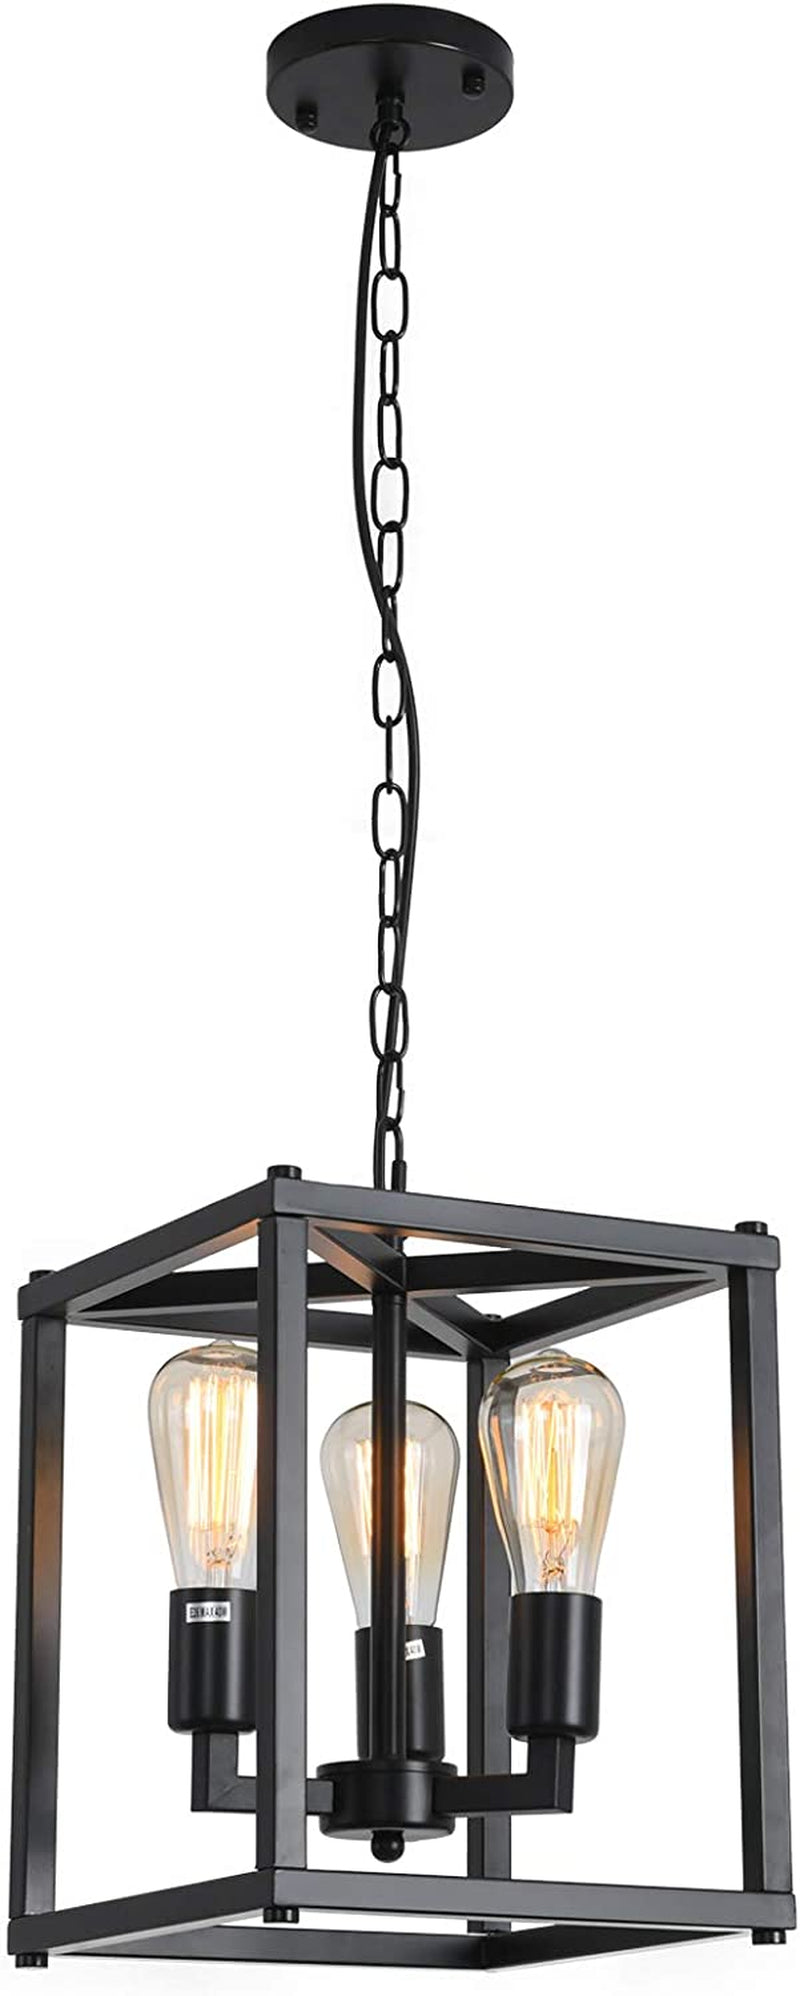 Farmhouse Chandelier Black Iron Chandelier 8 Lights Farmhouse Ceiling Light Fixtures Hanging for Dining Room Industrial Rustic Pendant Lights Living Room Bedroom Home & Garden > Lighting > Lighting Fixtures > Chandeliers Walnut Tree Black Style C Black-3 lights 